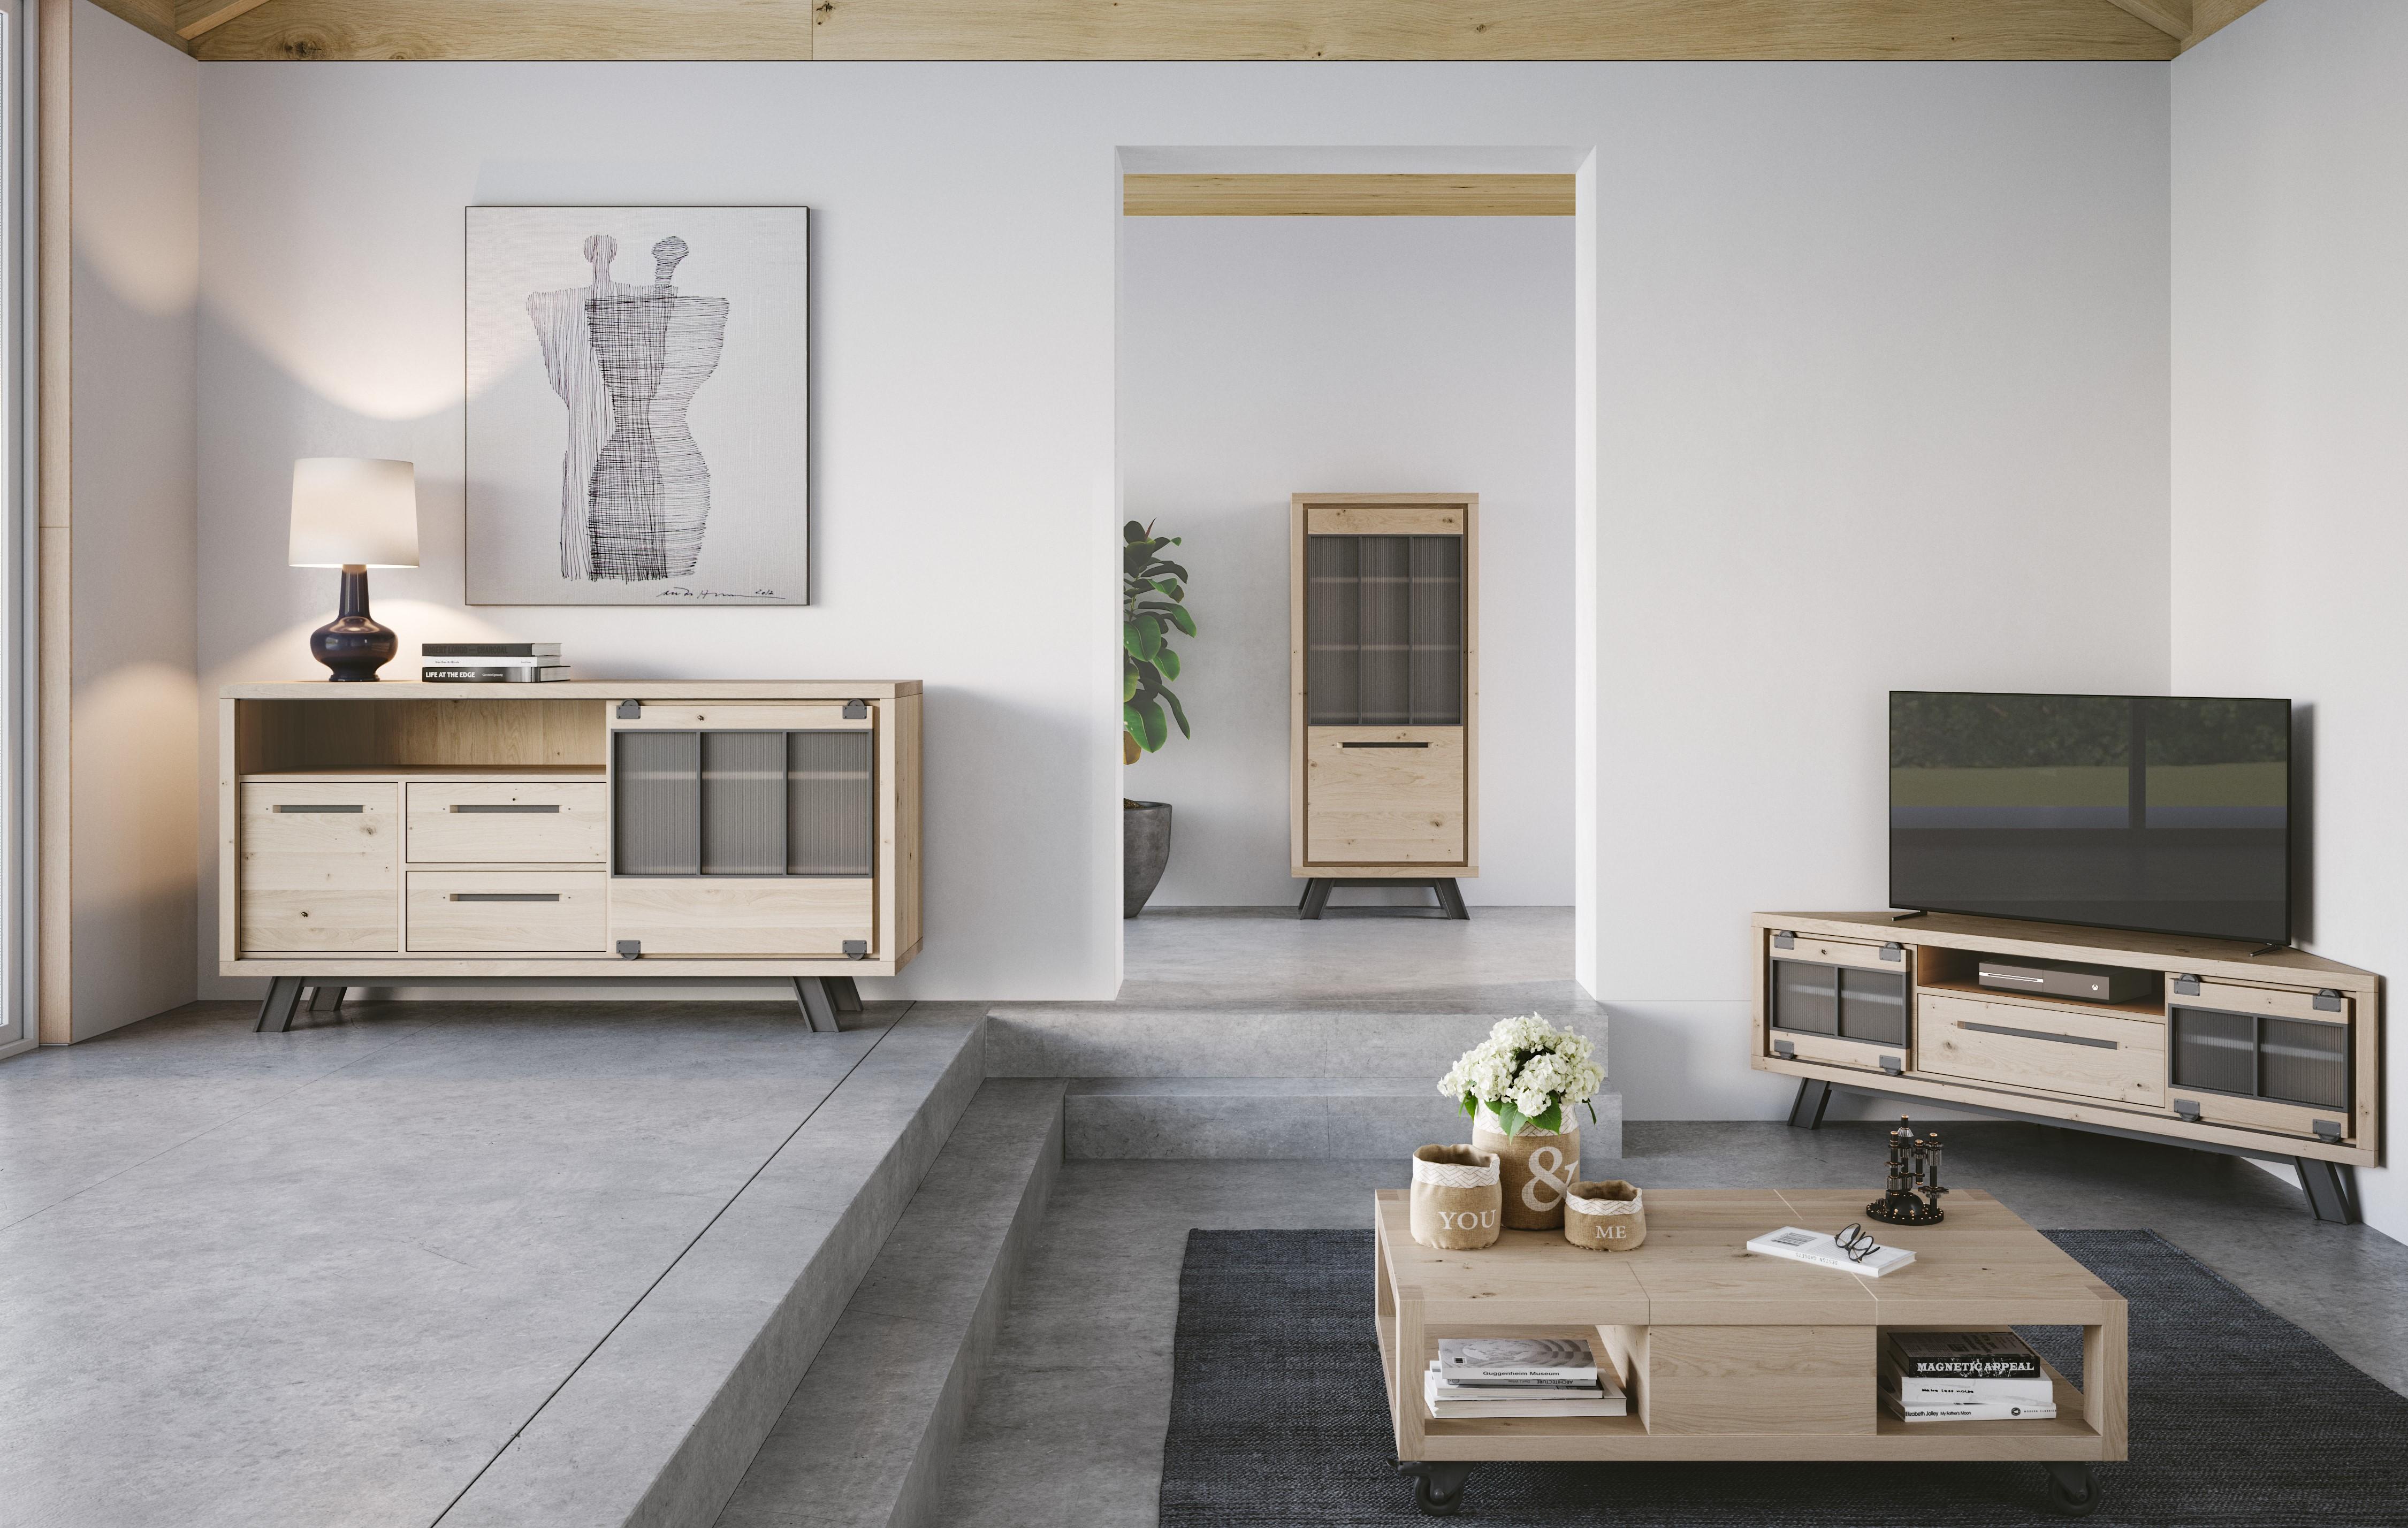 The ST James collection incorporates glass and metel details in its furniture pieces that give them a sober and industrial look without compromising their versatility. Measure: 170cm.

Produced by Cacio with more than 70 years of know how, this